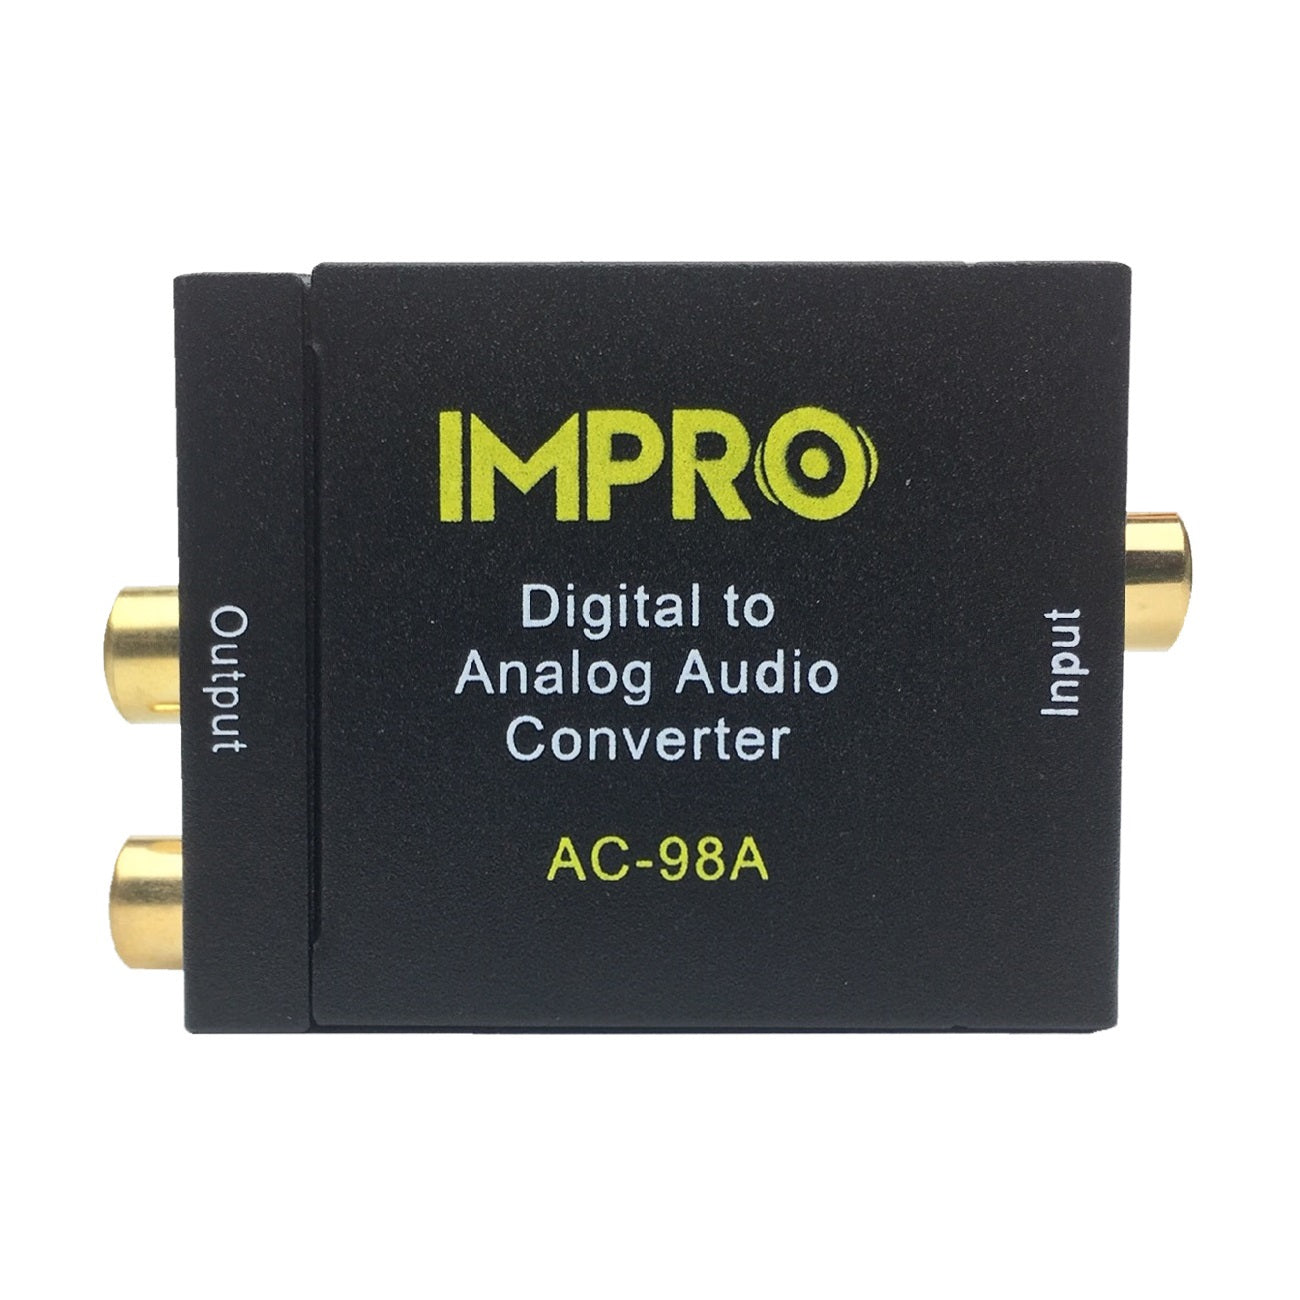 ImPro AC-98A will Convert Smart TV into Unlimited Youtube Karaoke Player